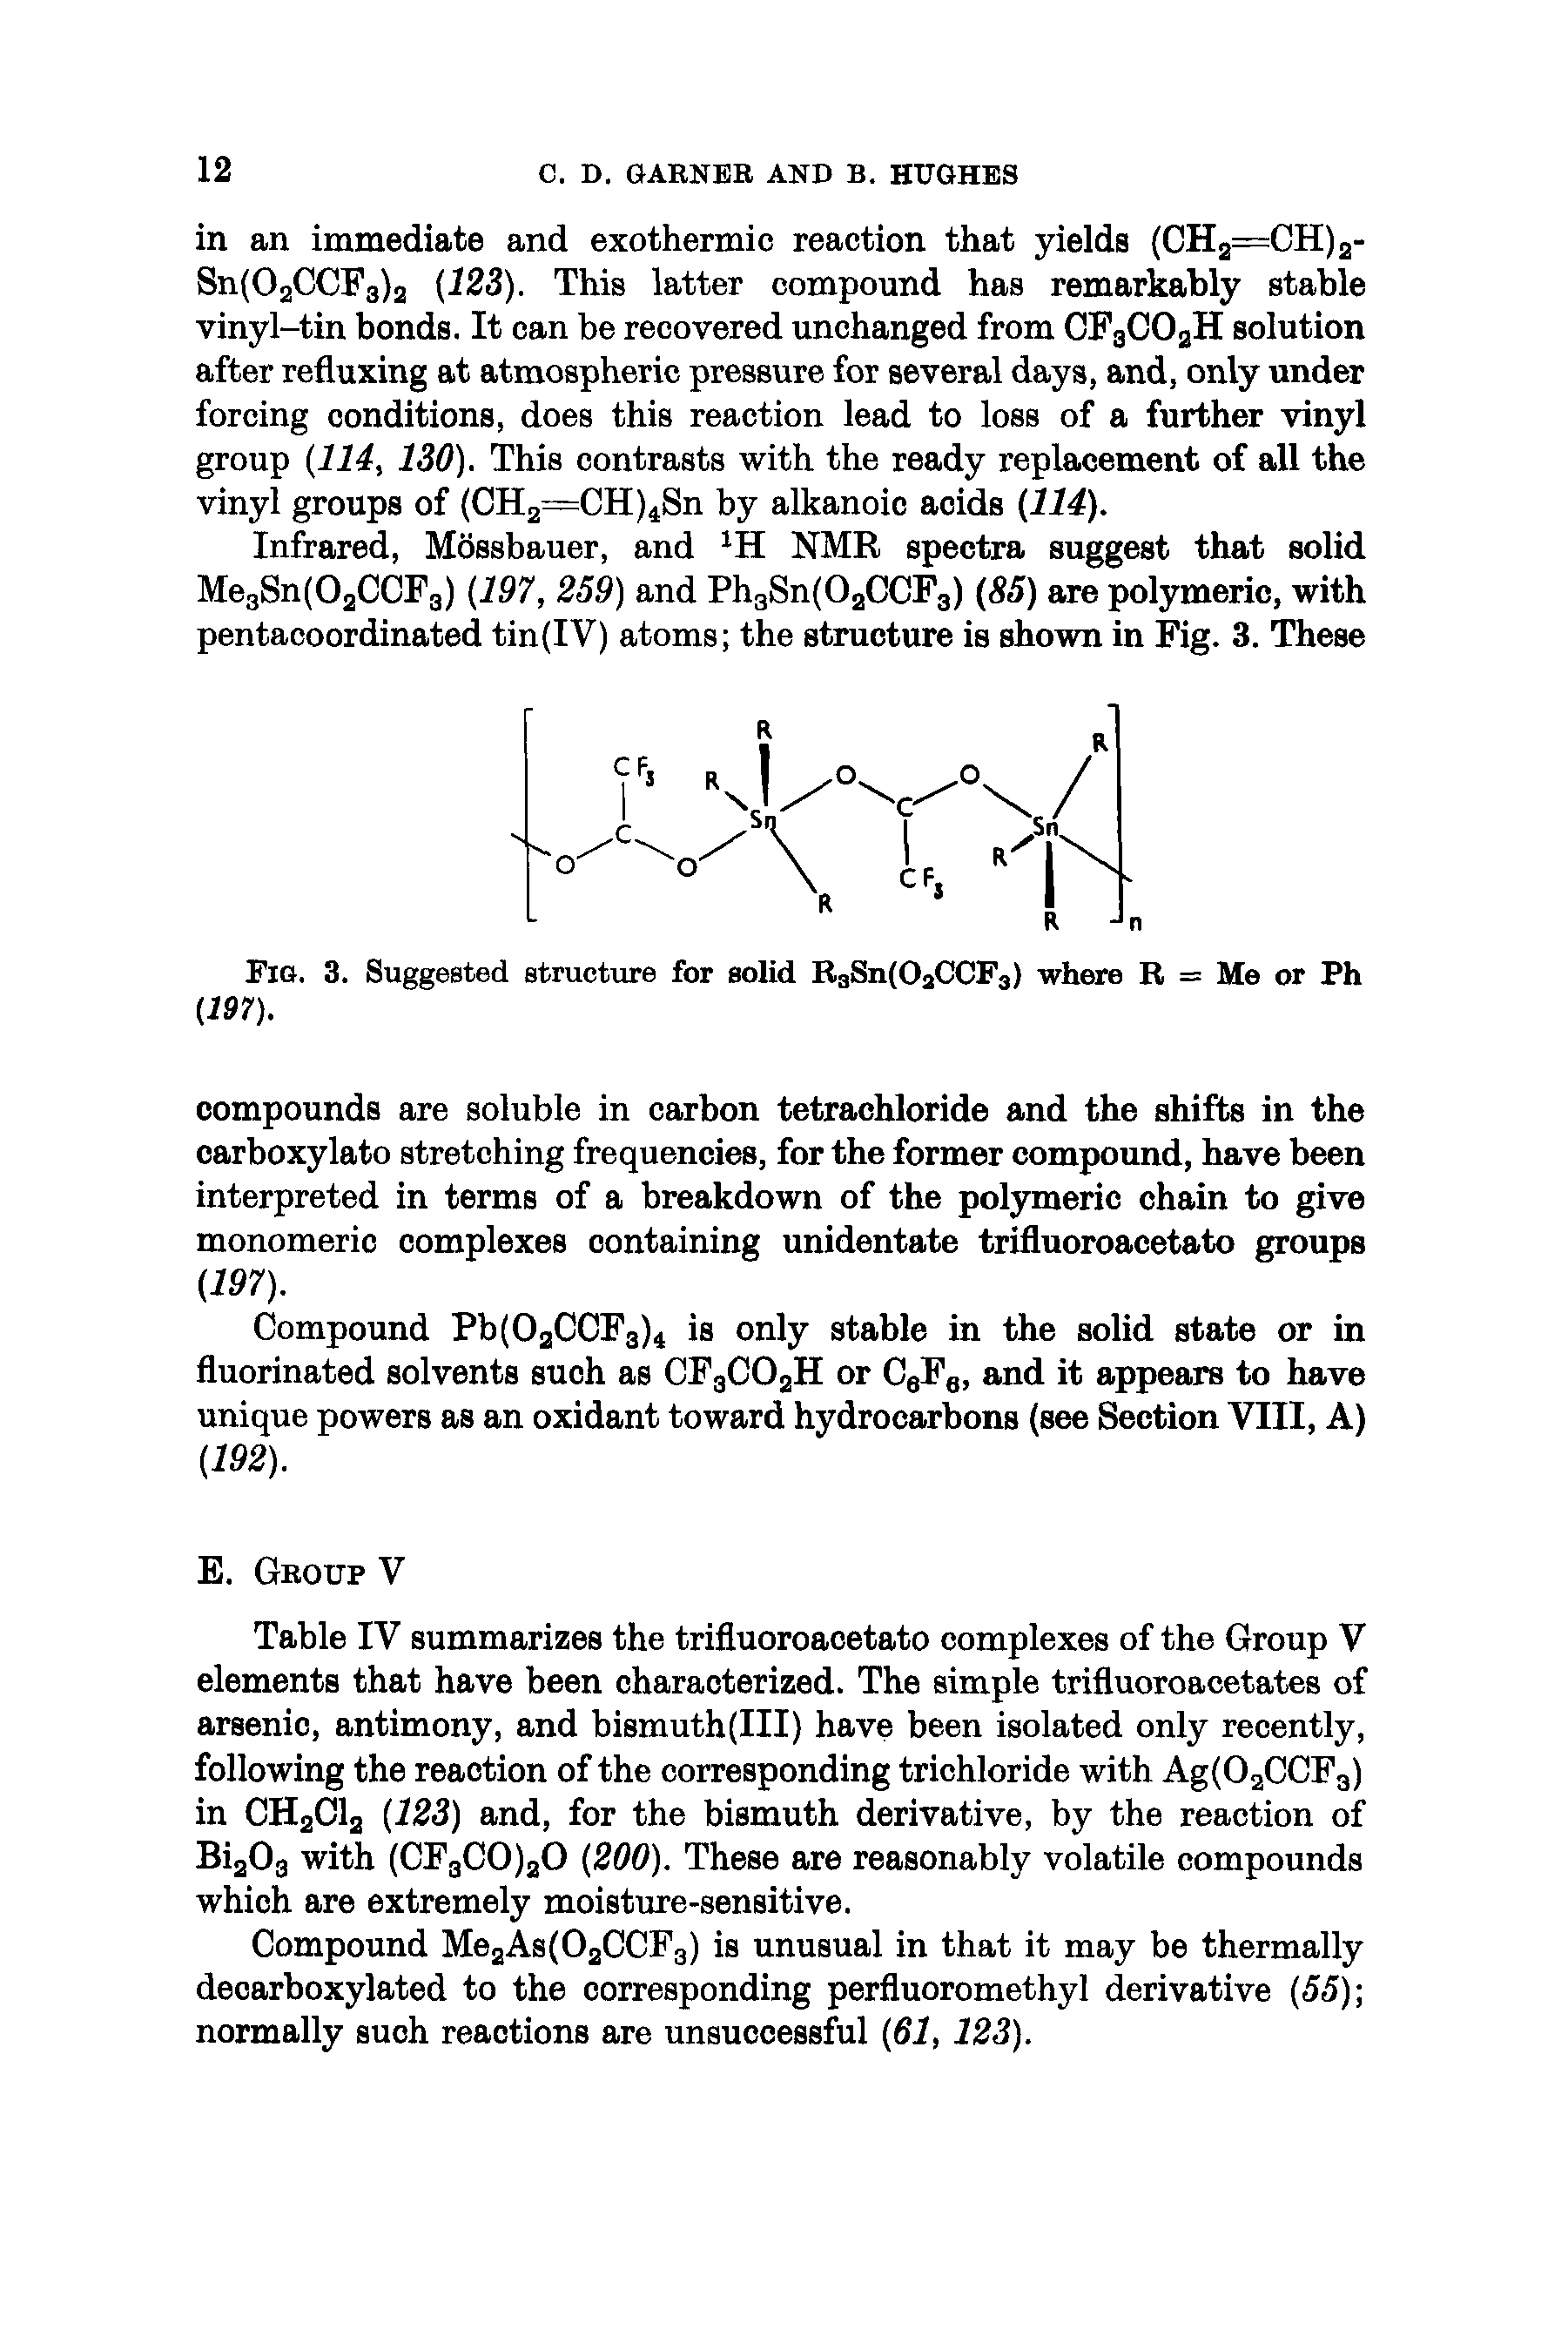 Table IV summarizes the trifluoroacetato complexes of the Group V elements that have been characterized. The simple trifluoroacetates of arsenic, antimony, and bismuth(III) have been isolated only recently, following the reaction of the corresponding trichloride with Ag(02CCF3) in CH2CI2 (123) and, for the bismuth derivative, by the reaction of Bi203 with (CFaCO)aO (200). These are reasonably volatile compounds which are extremely moisture-sensitive.